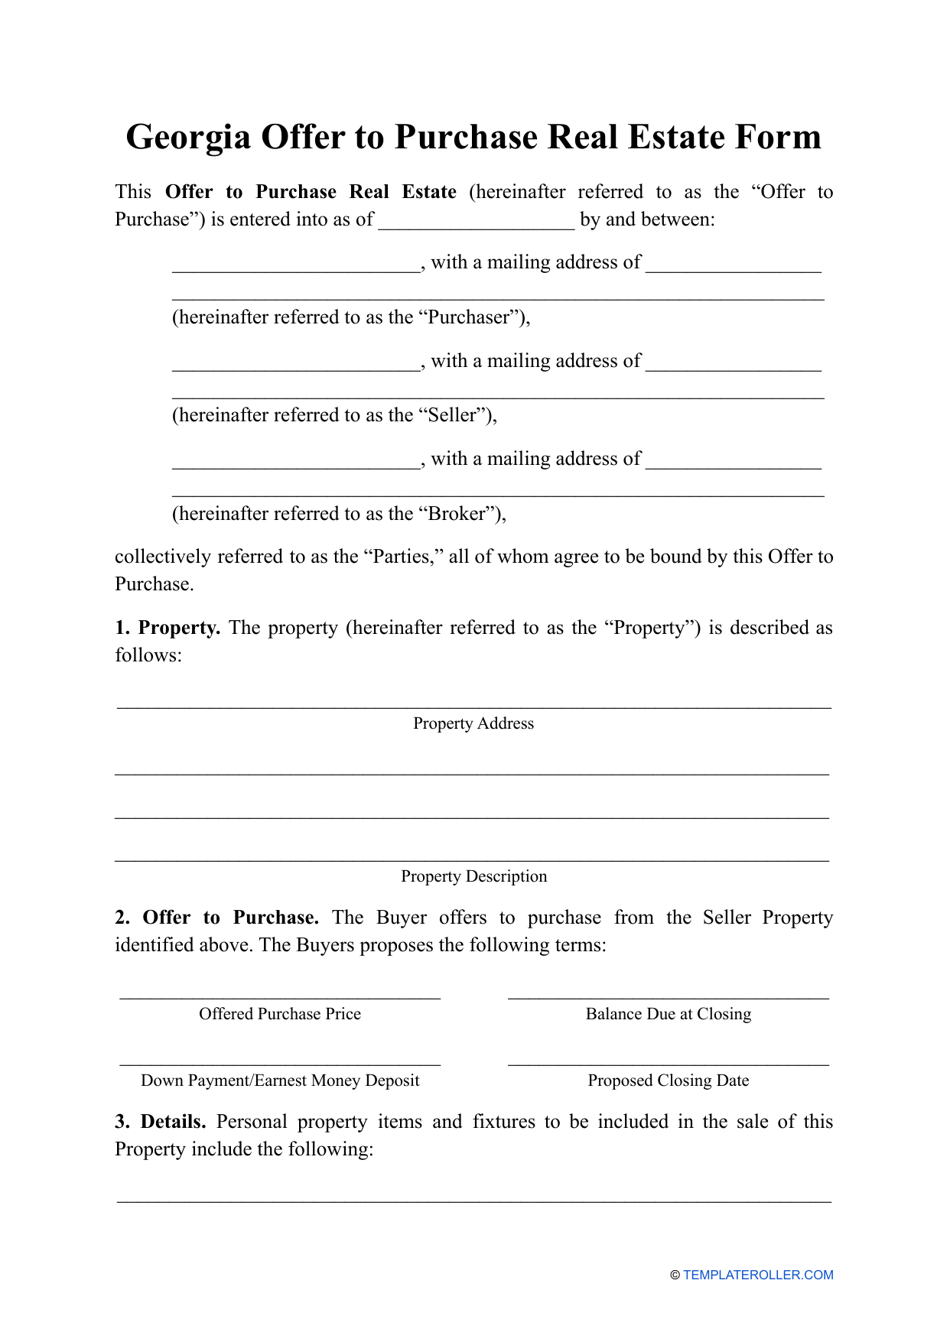 Offer to Purchase Real Estate Form - Georgia (United States), Page 1